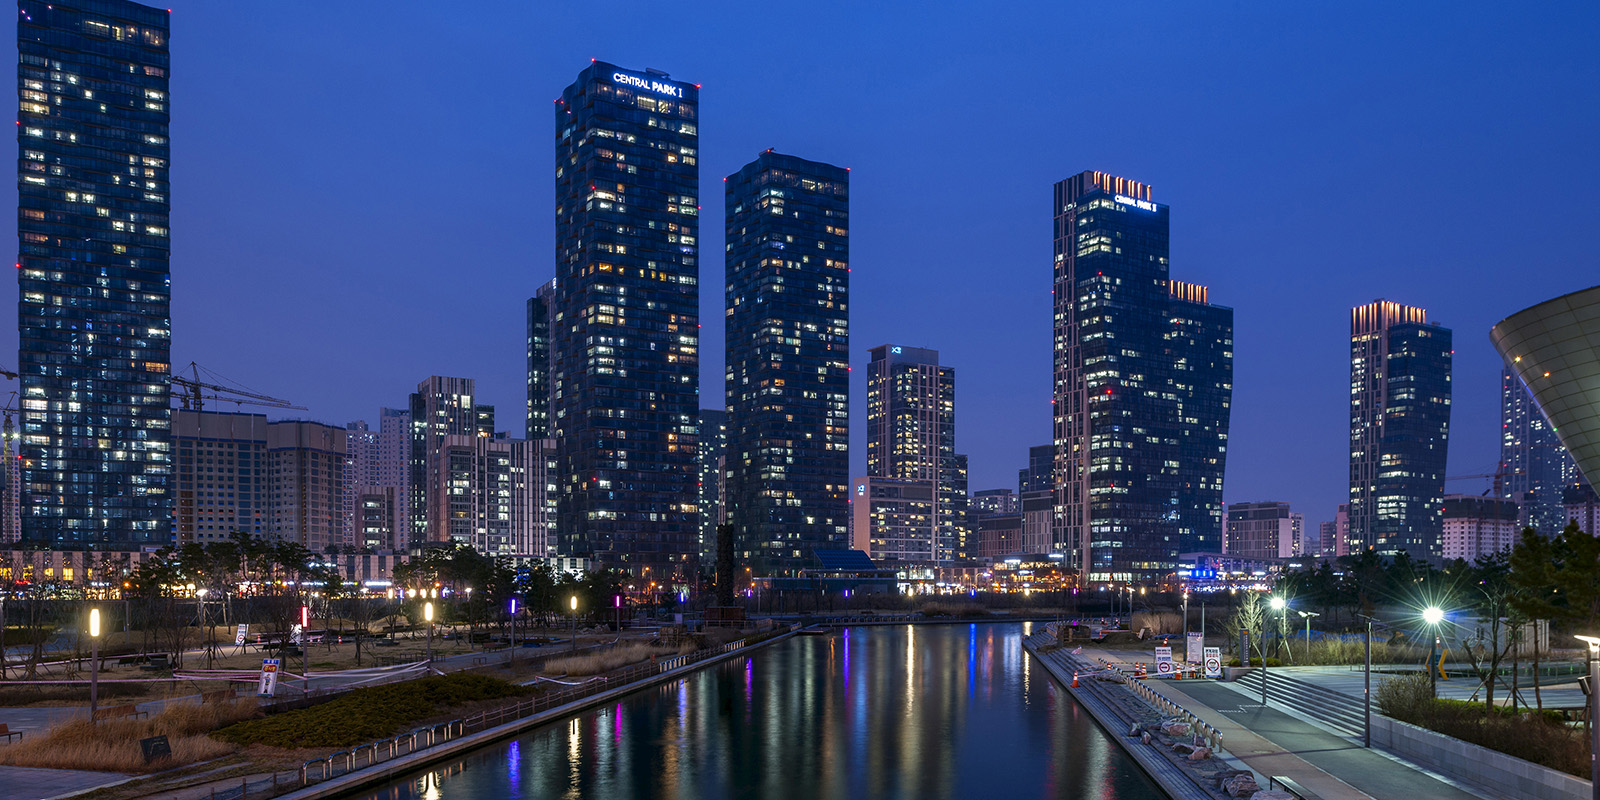 City skyline at night. G-Tower in Incheon, Incheon, Korea, South. Architect: HAEAHN Architecture, 2013.